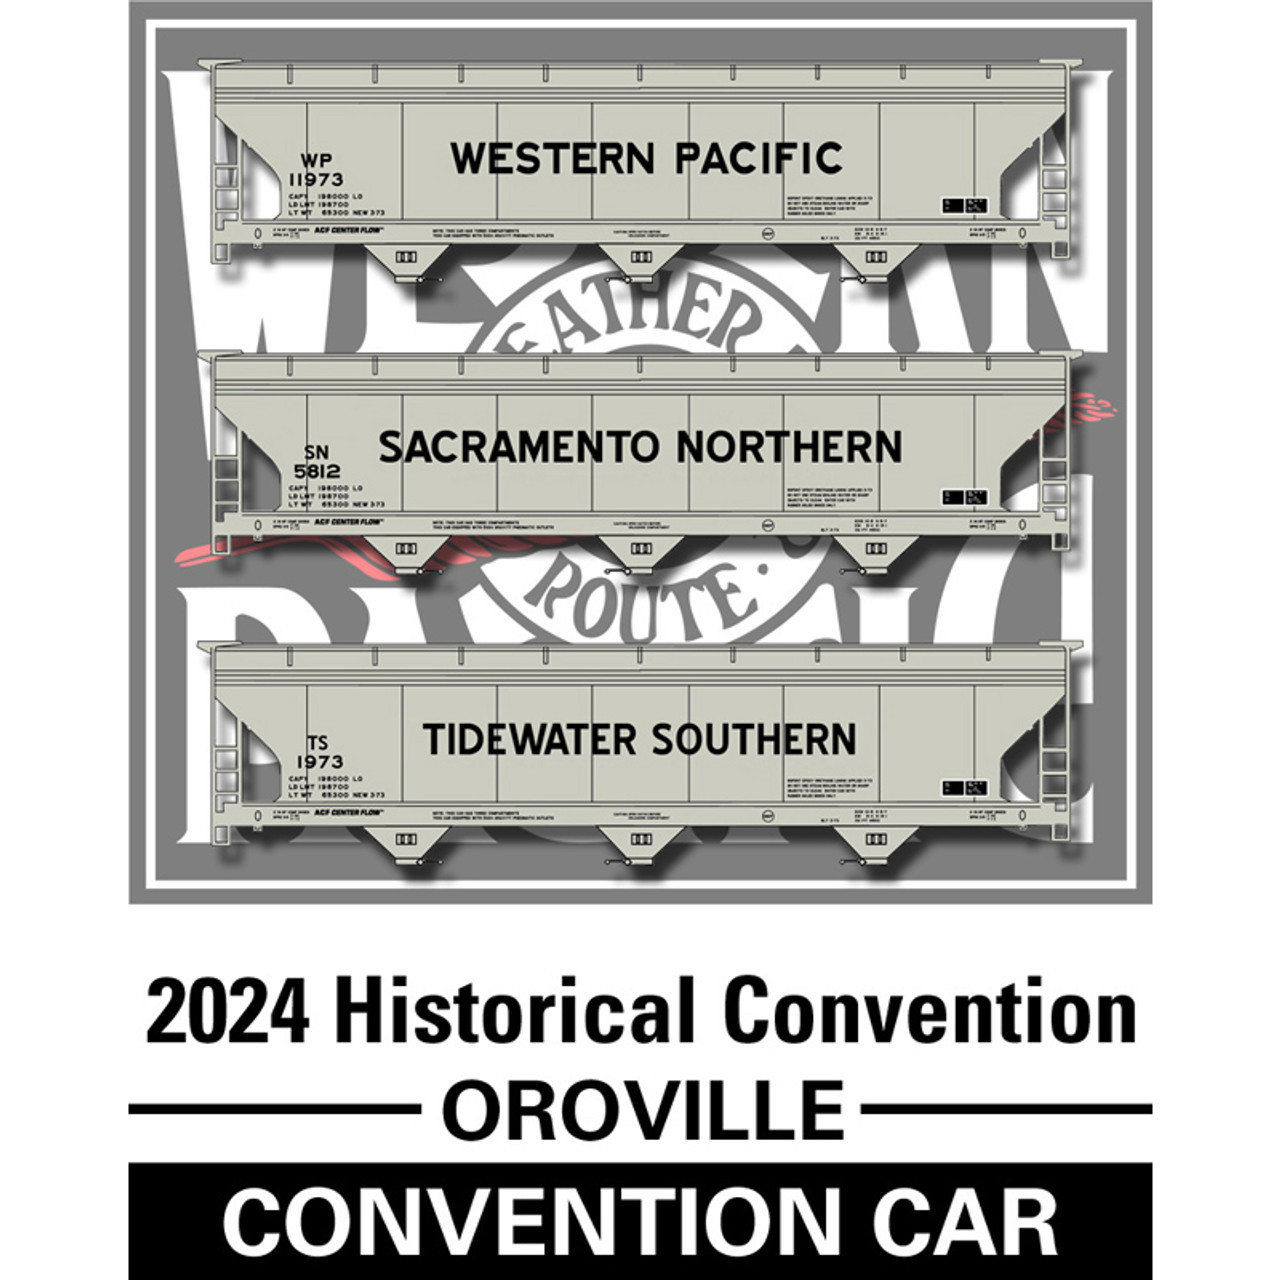 /news_items/2024_Western_Pacific_Historical_Convention/2024_convention_car_1280x1280.jpg image not found